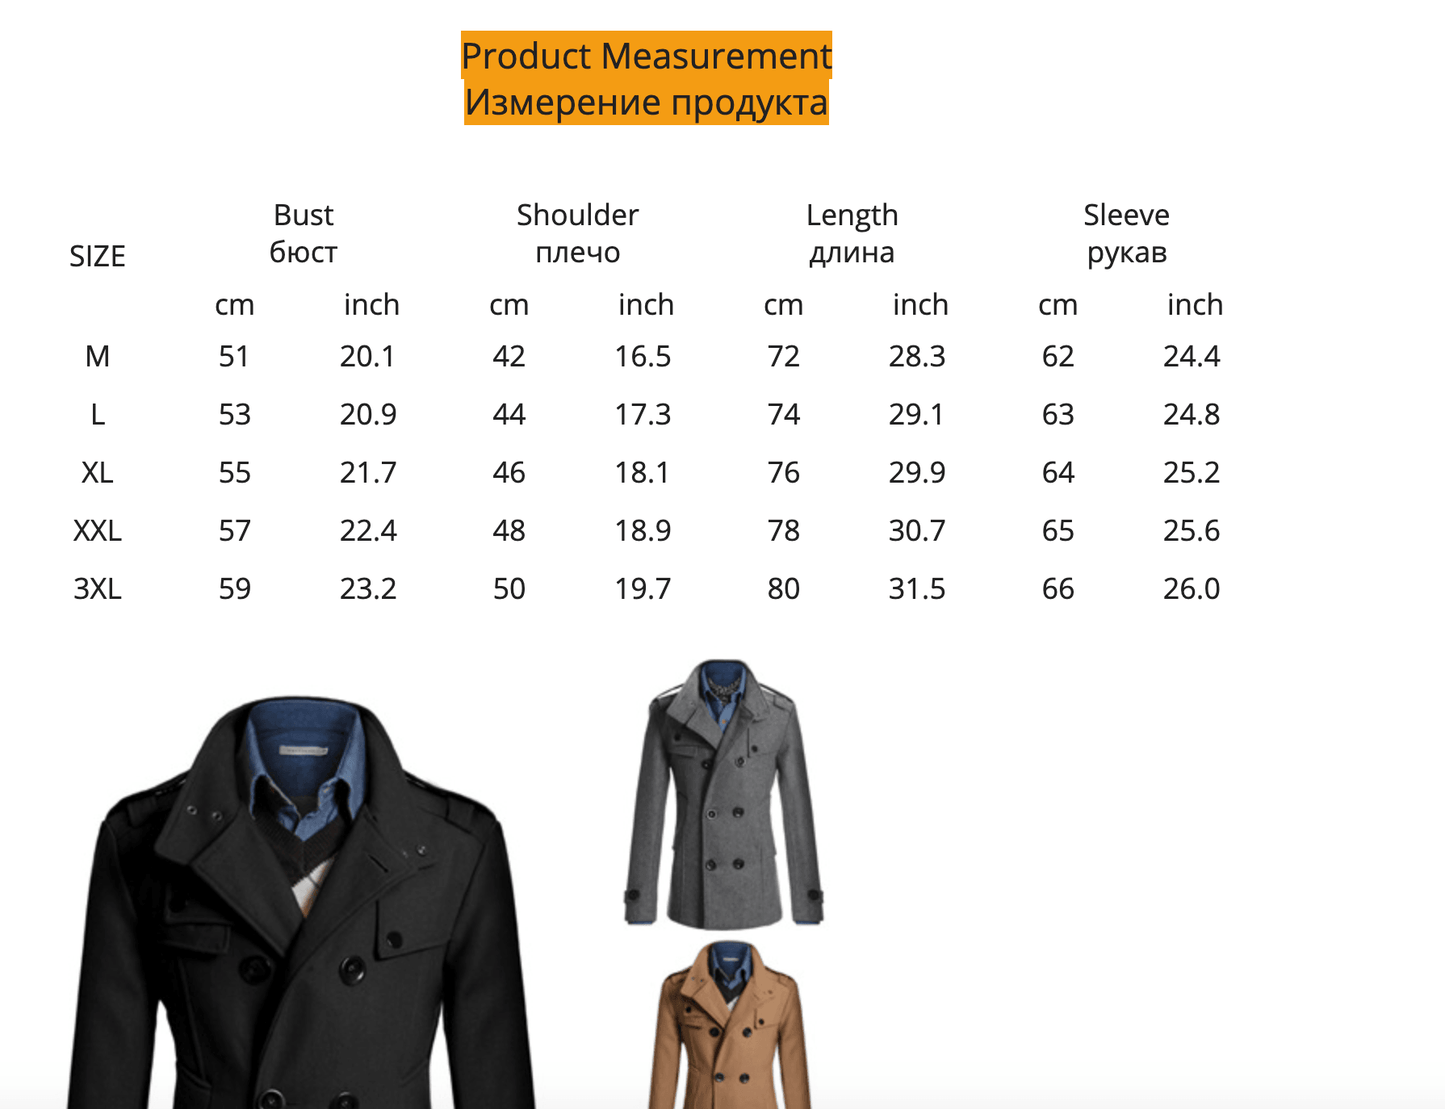 New Stylish Winter Men Solid Blend Coats - Fashion Brand Overcoat Men Long Wool Coat Double Breasted Thick Blend Male Clothing (D100)(TM4)(CC1) - Deals DejaVu